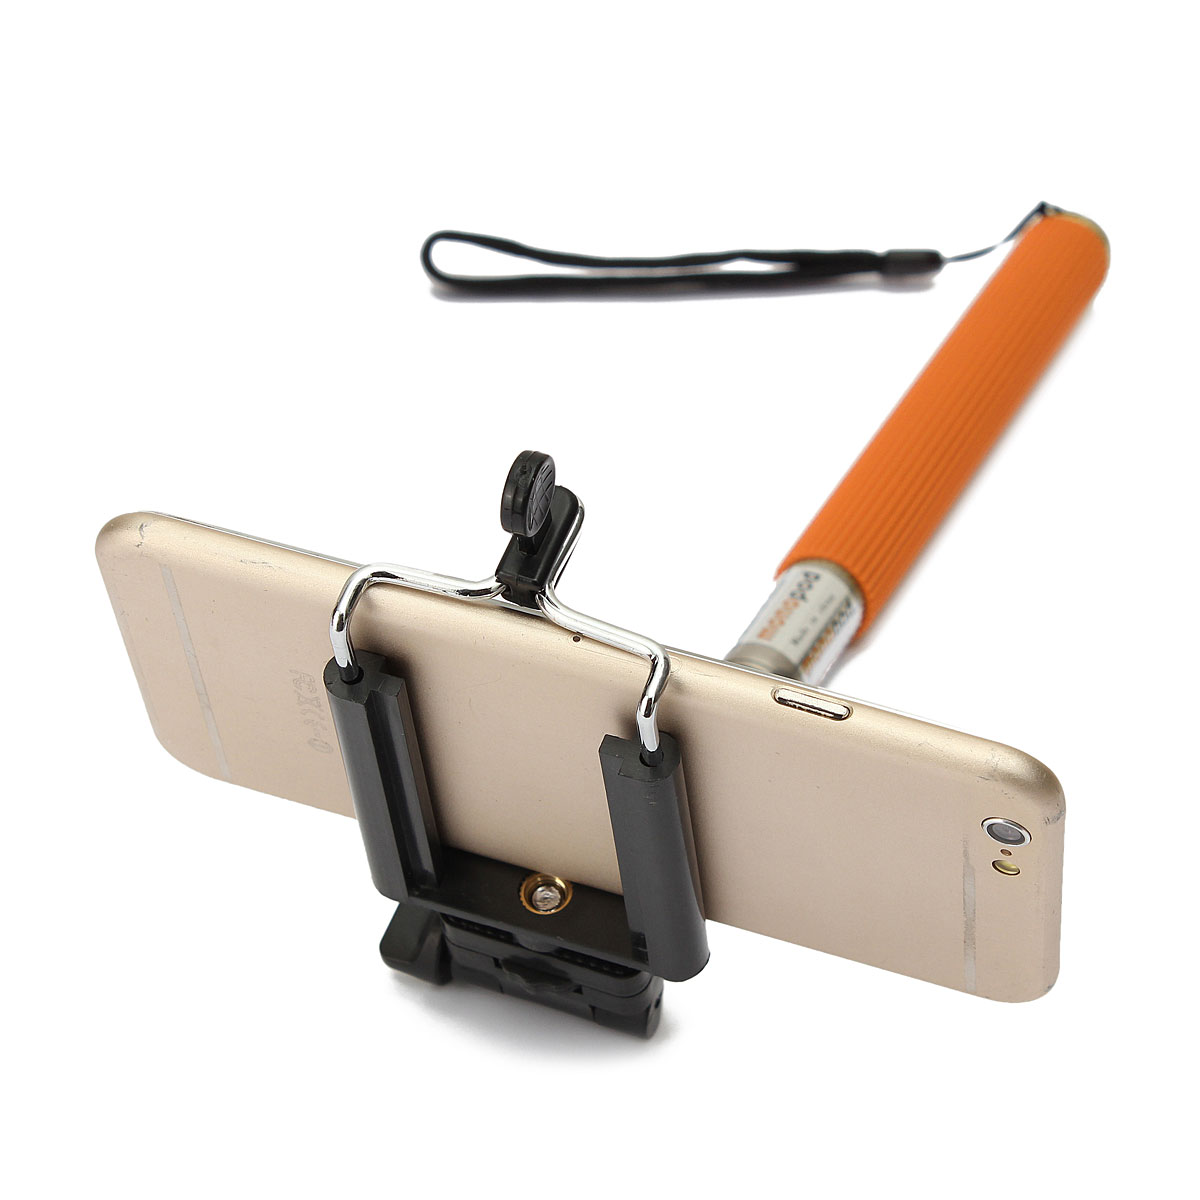 Extendable Handheld Selfie Stick Monopod with Clip for Smartphone